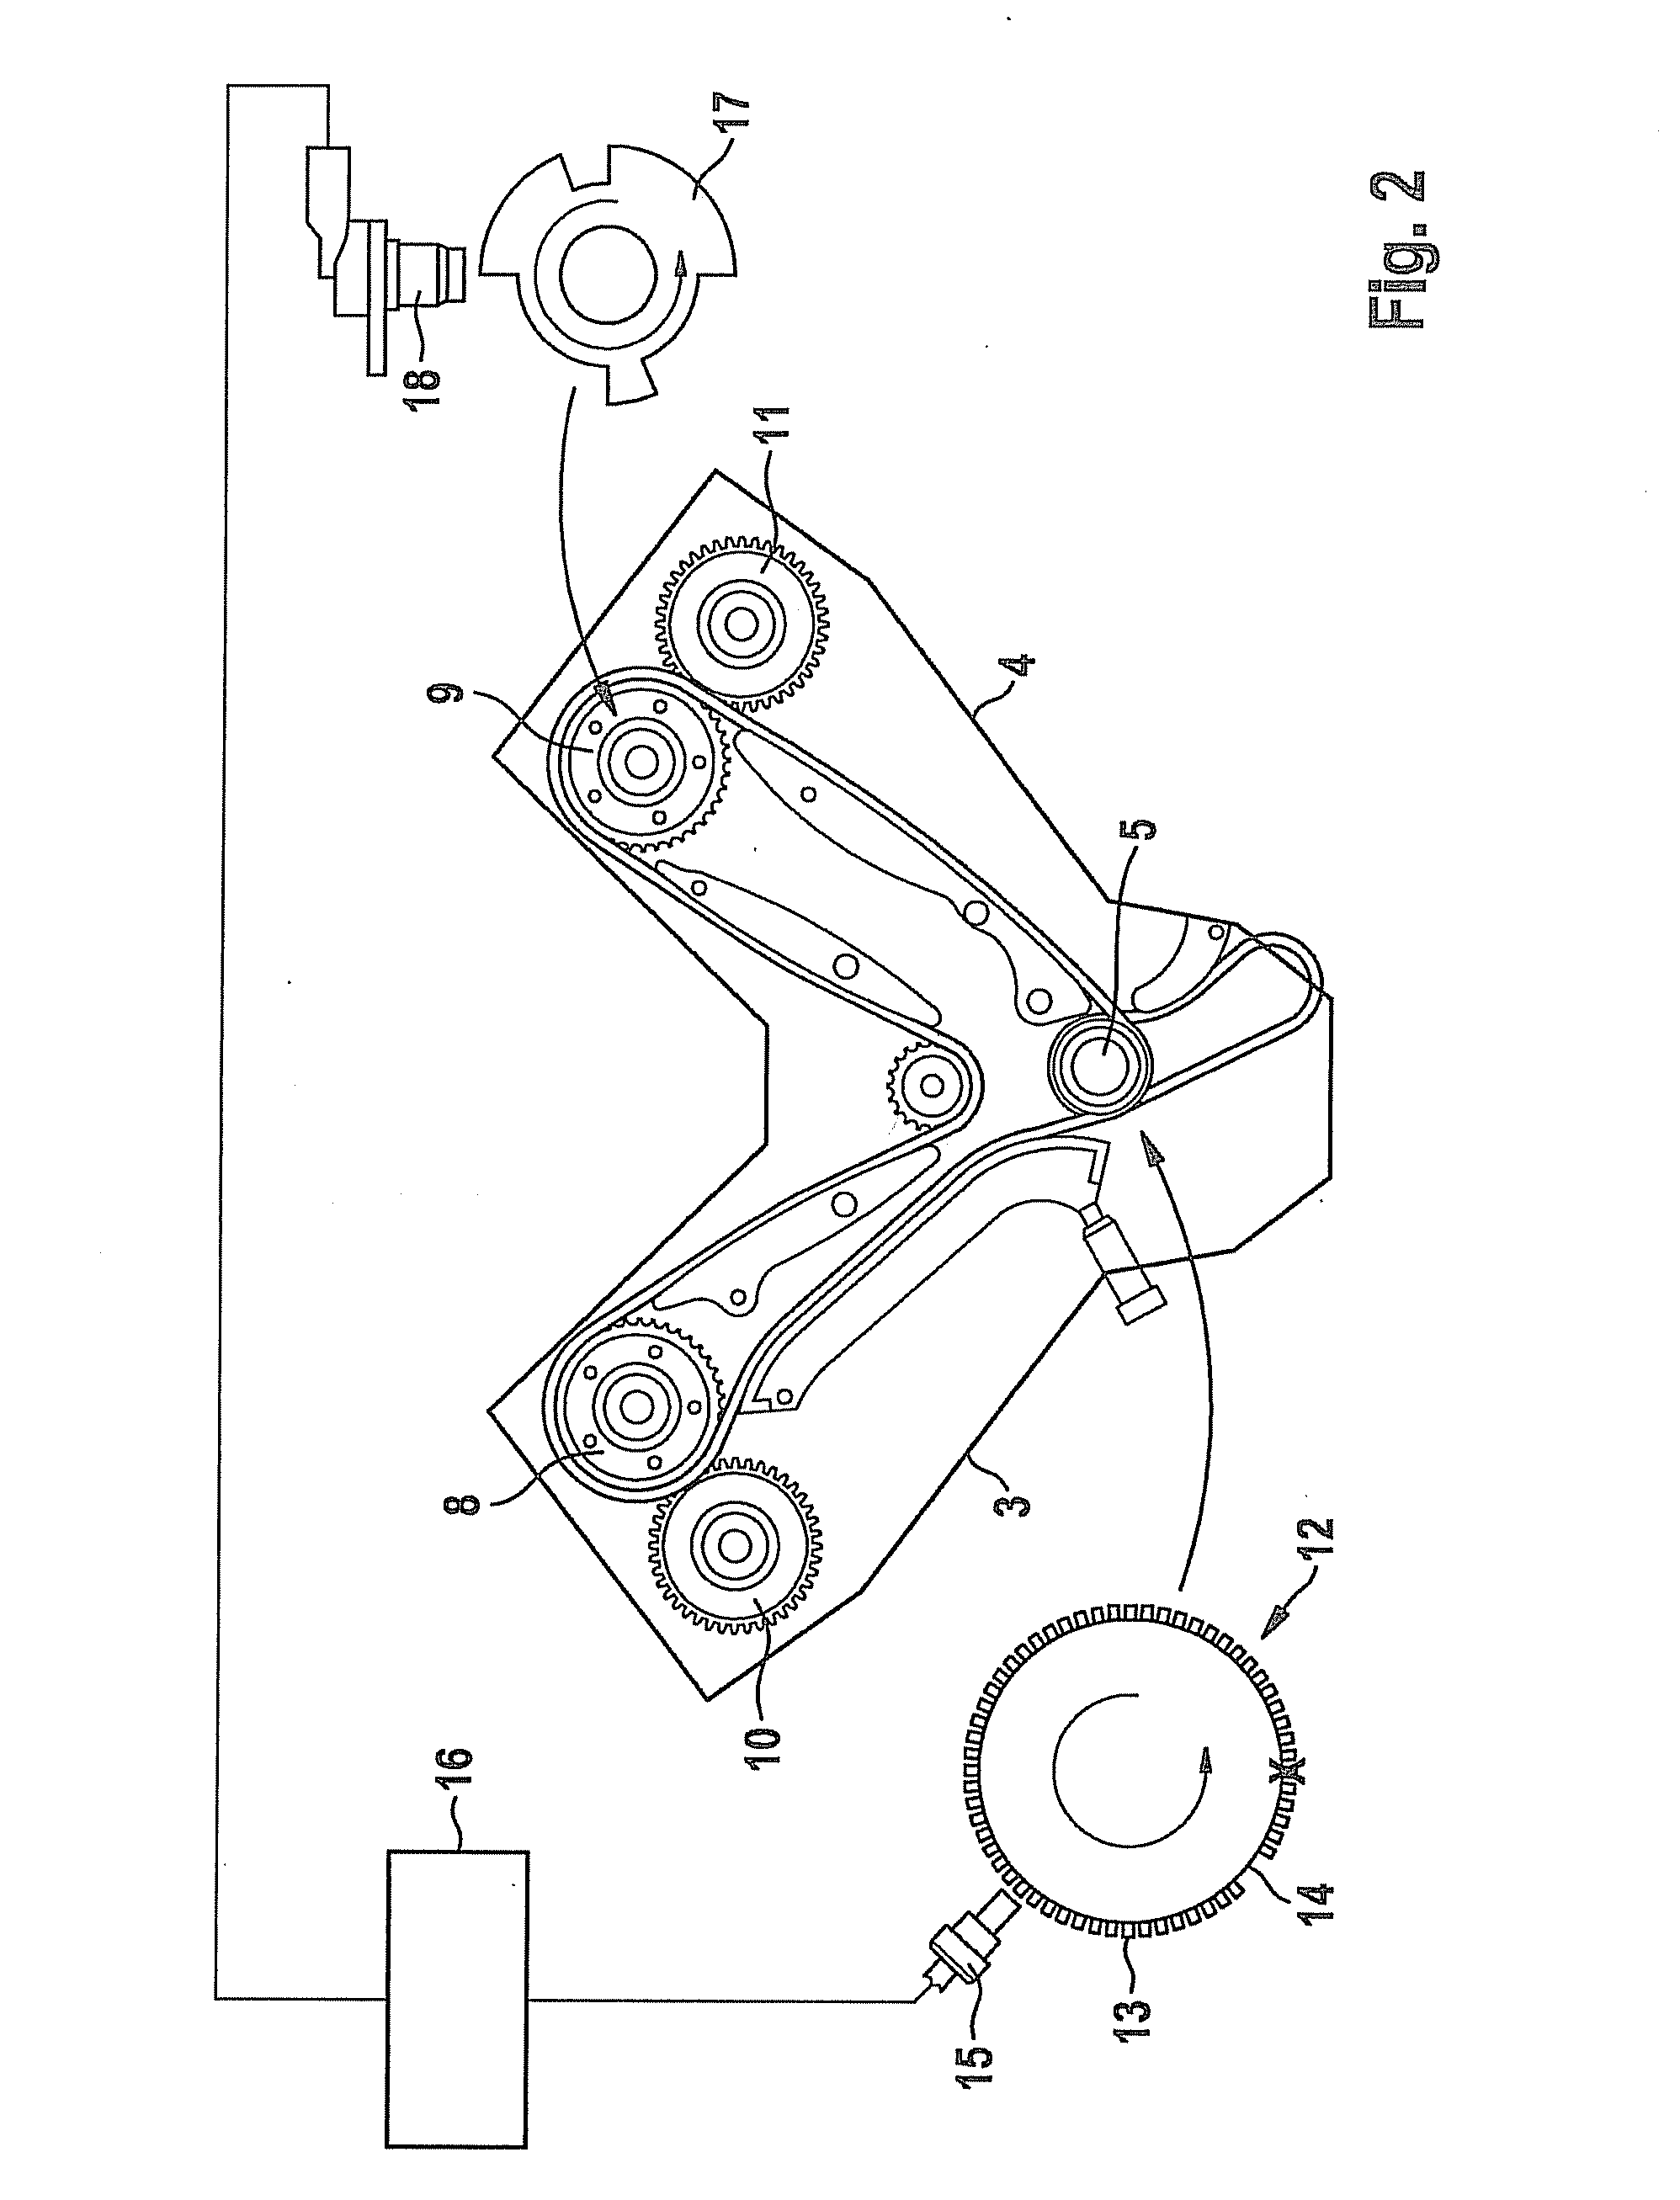 Method and device for operating an internal combustion engine in the event of a fault in a crankshaft sensor